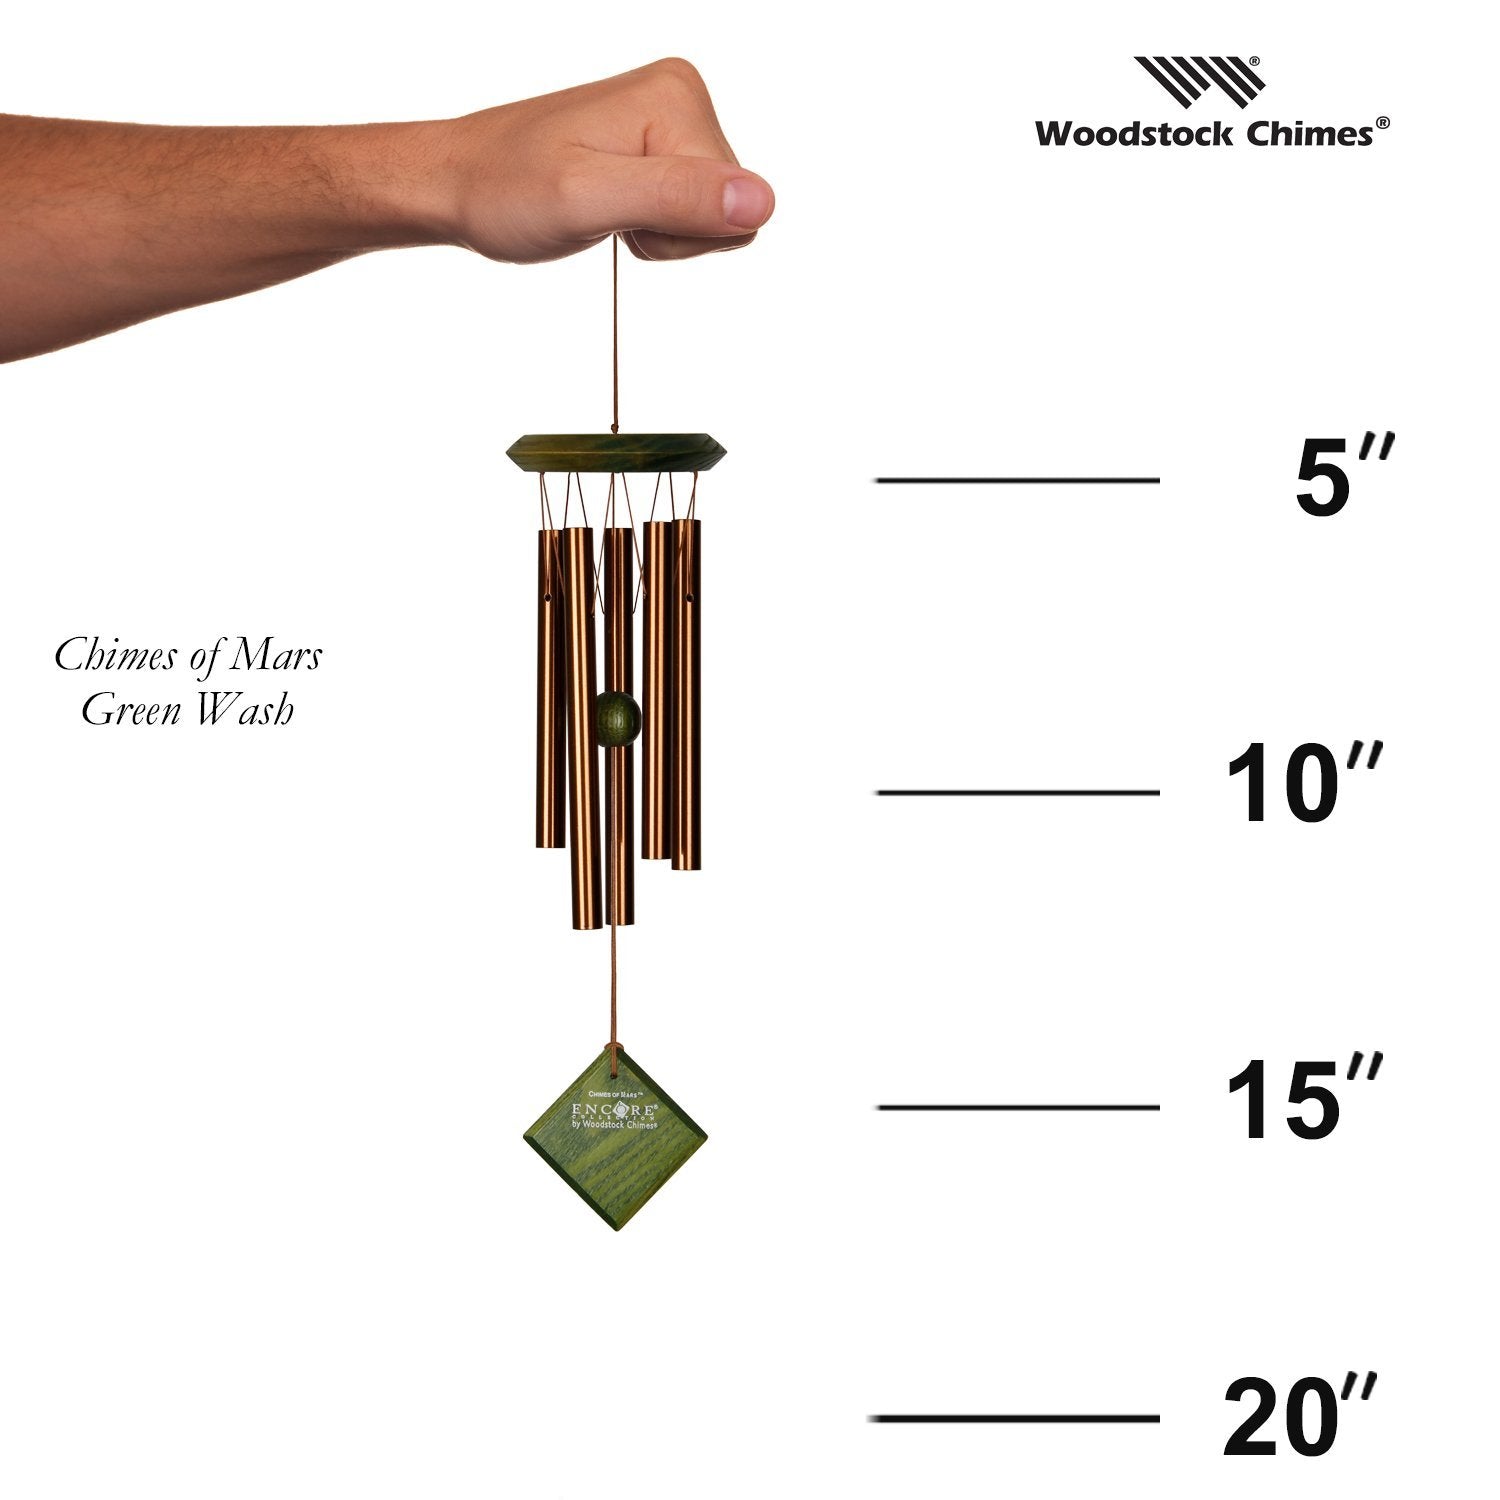 Encore Chimes of Mars - Green Wash proportion image